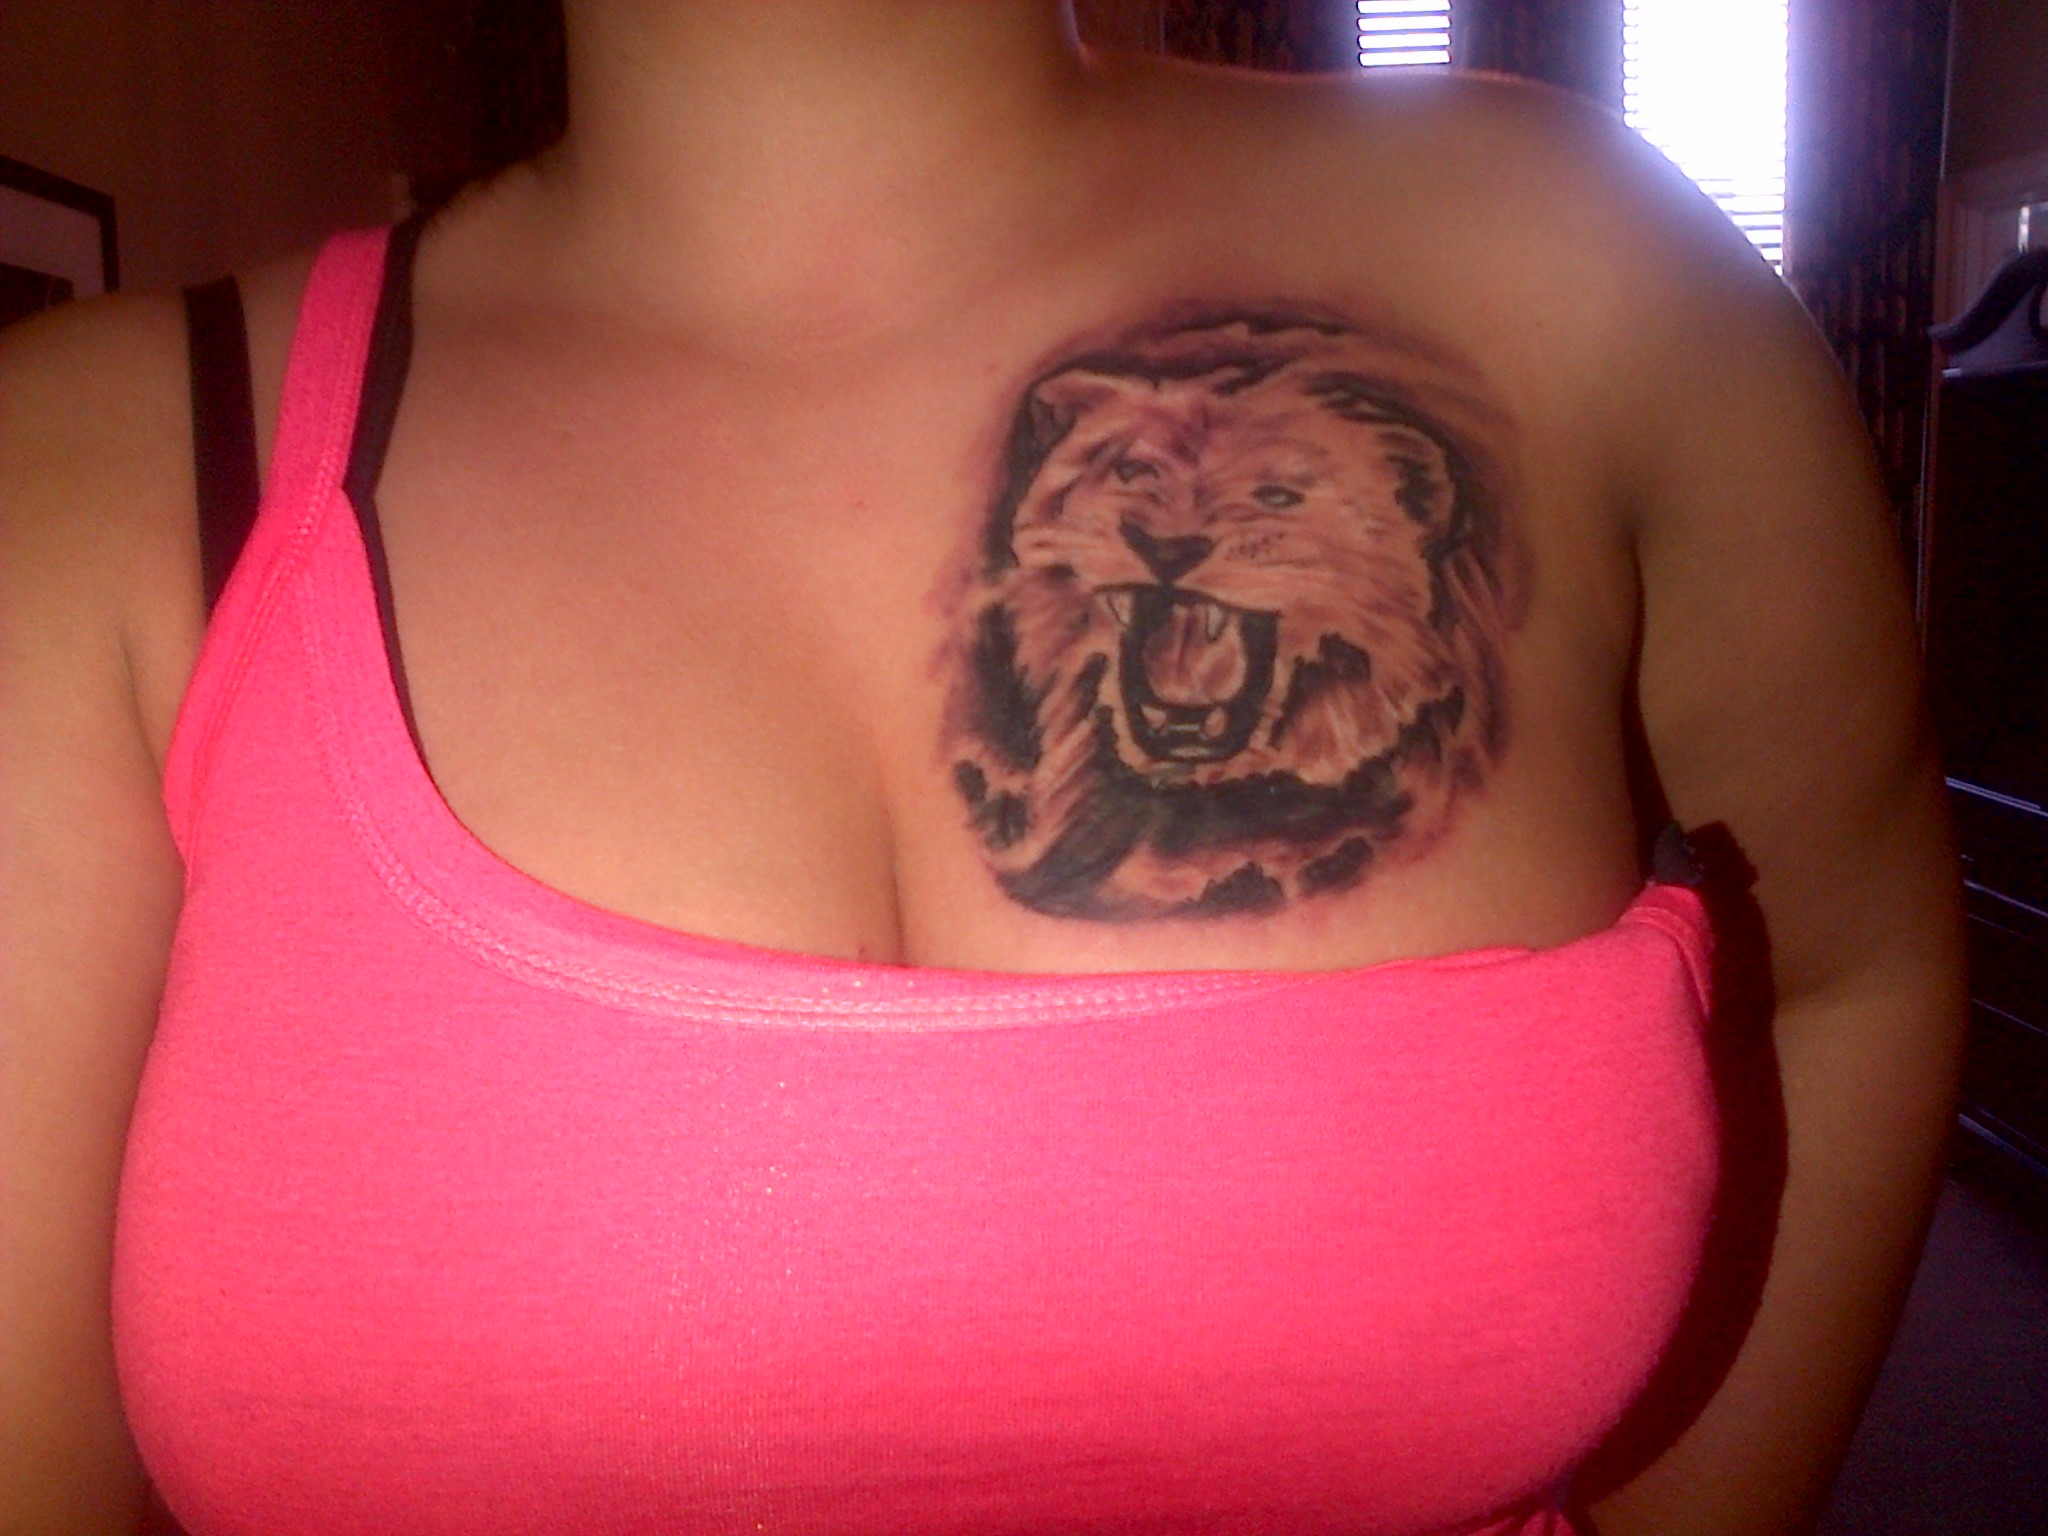 The next day... looking better. Ill go back in a few weeks to finish it!